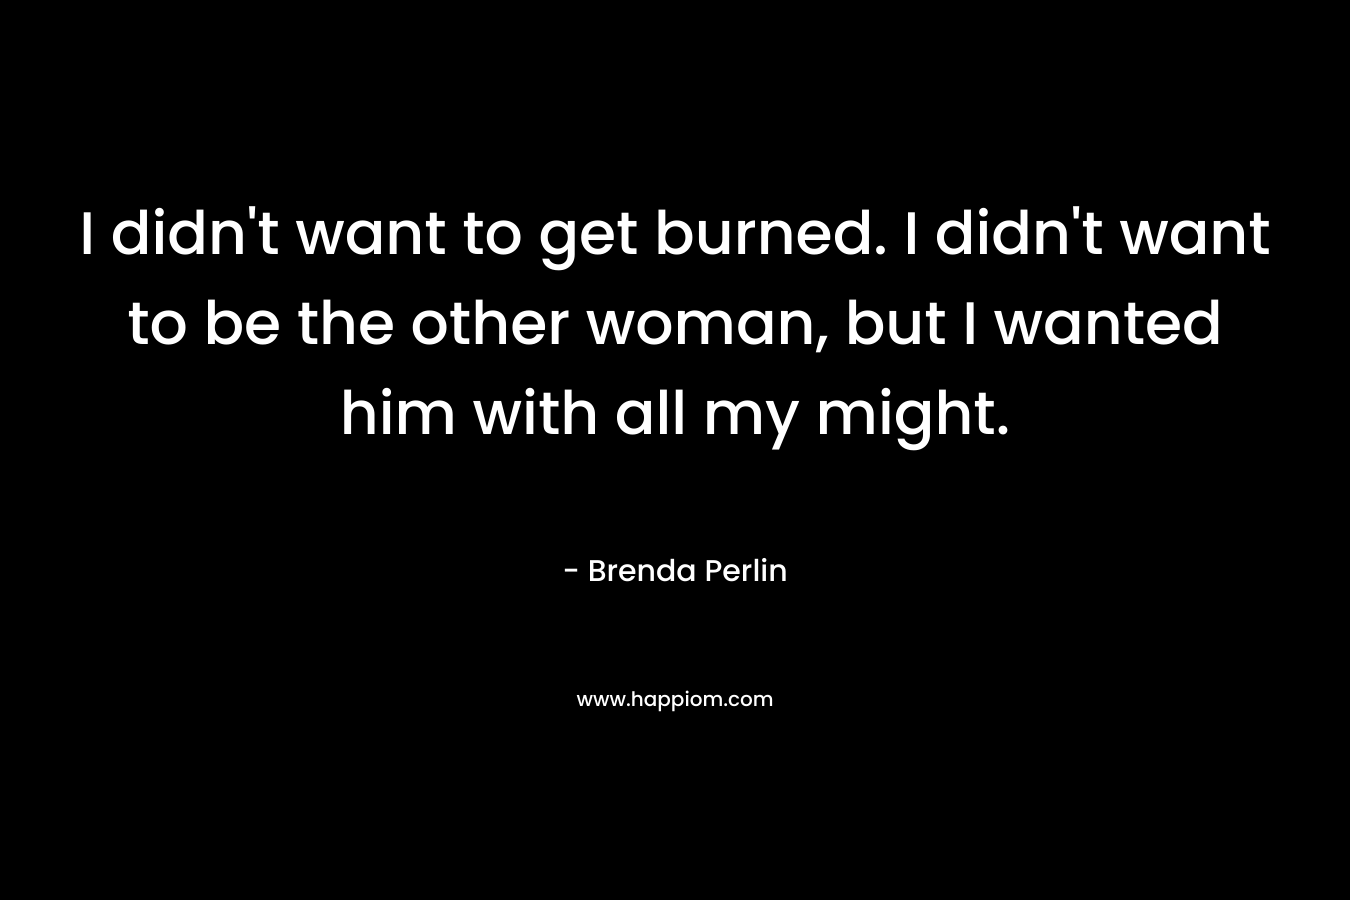 I didn't want to get burned. I didn't want to be the other woman, but I wanted him with all my might.